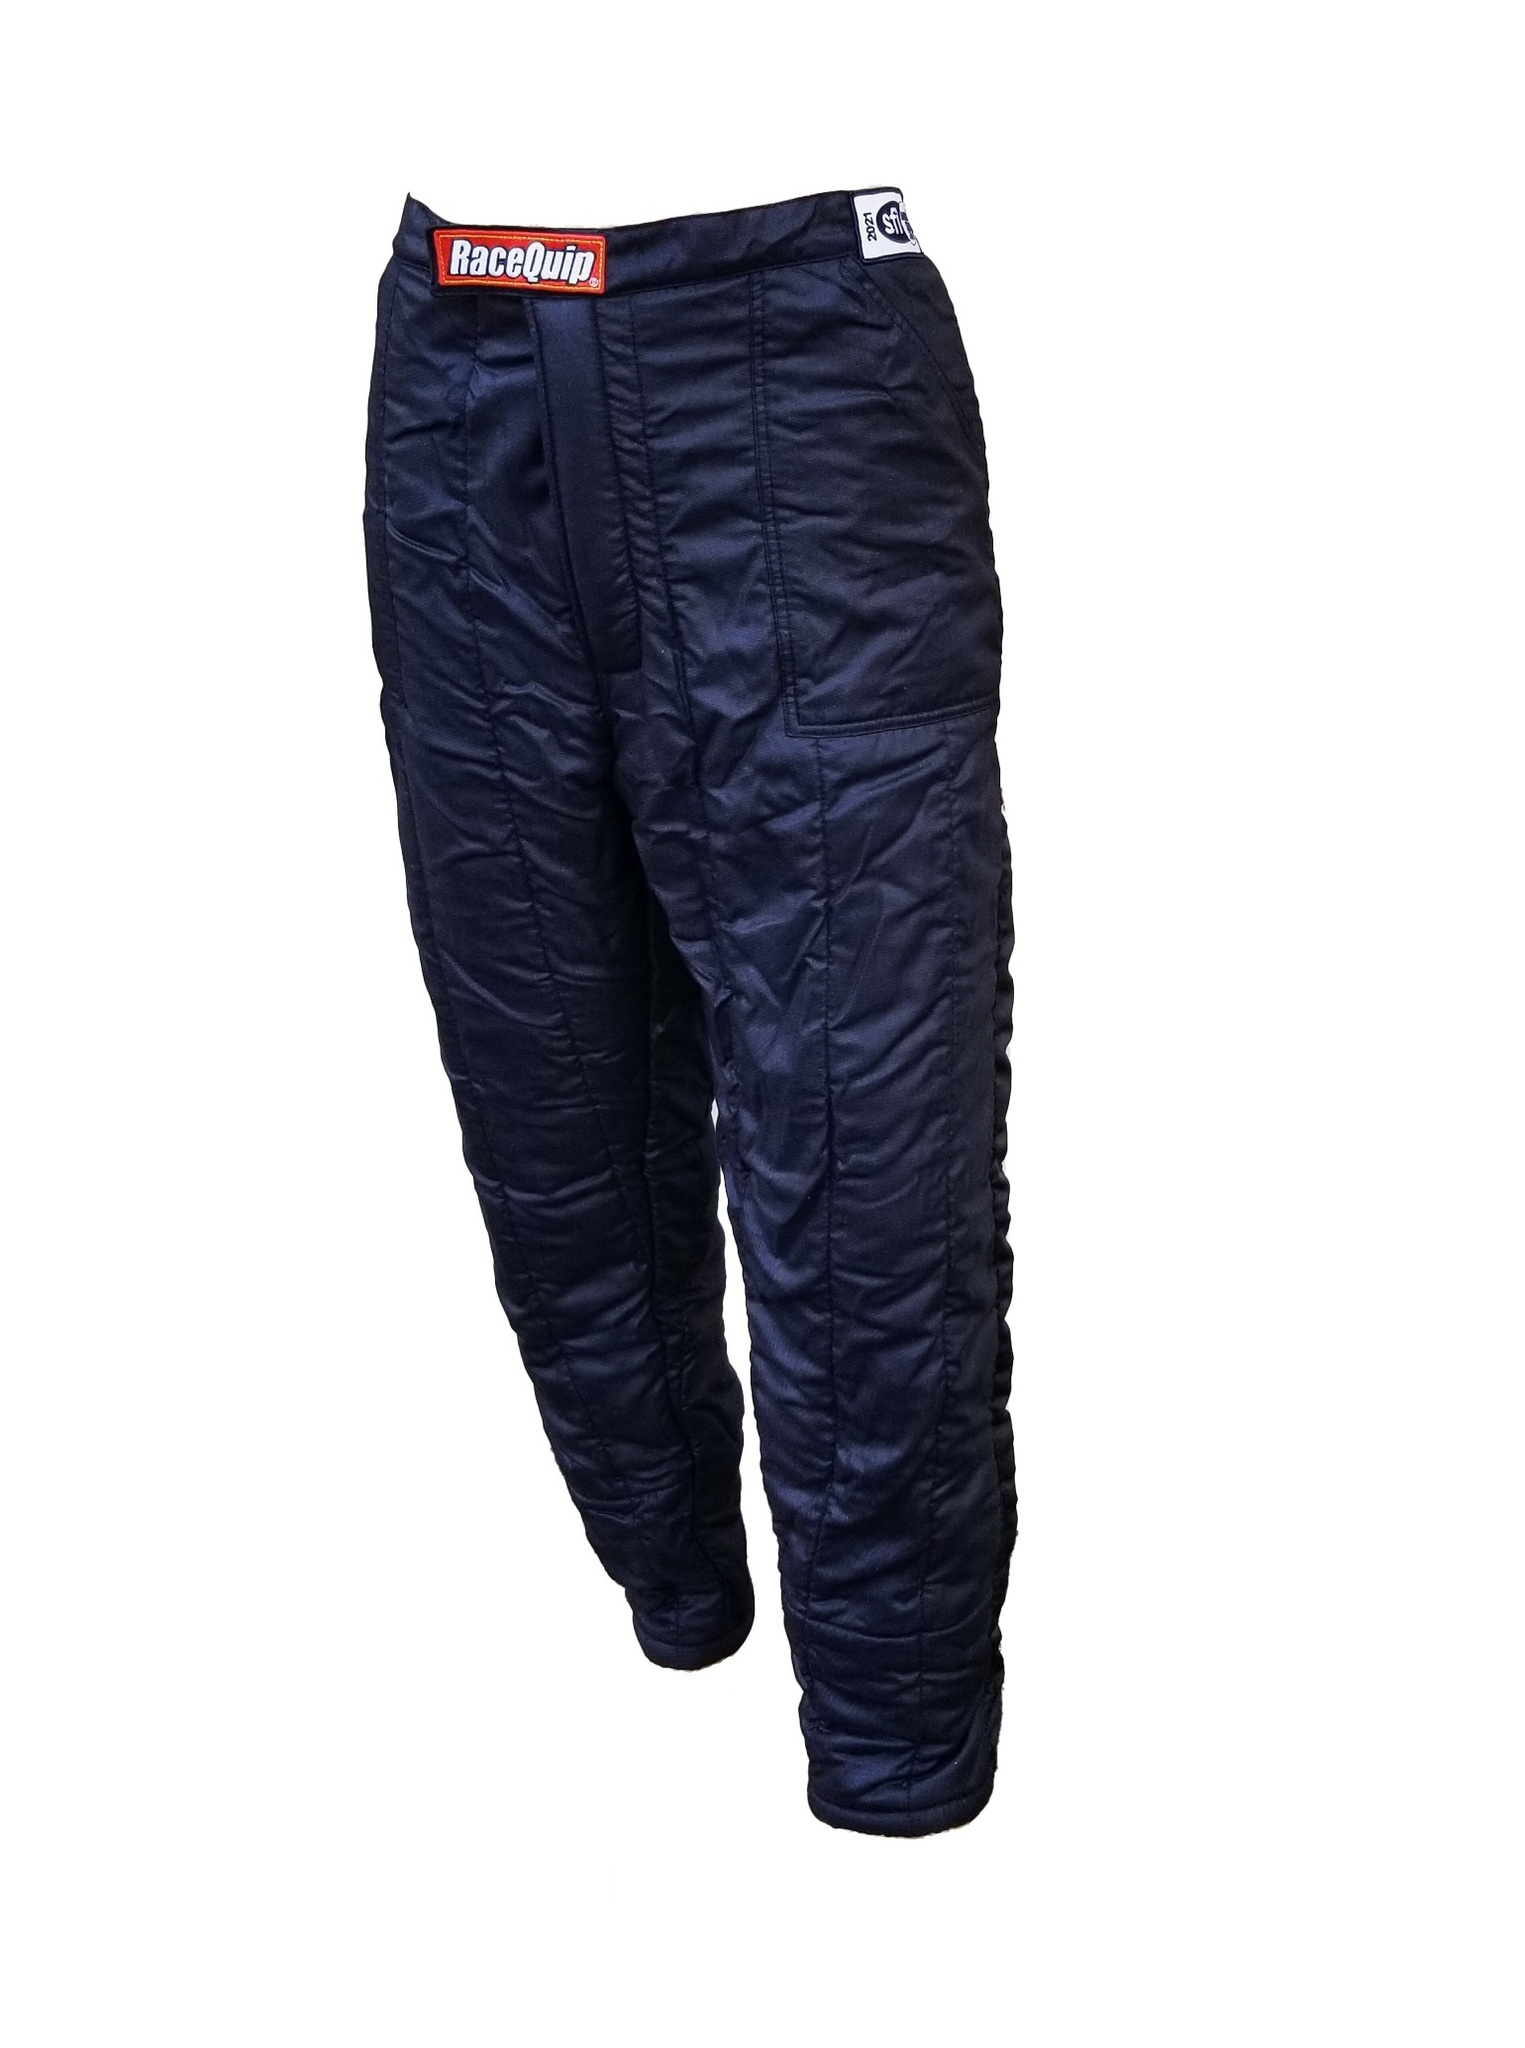 Racequip 91929959 Driving Pants, SFI 3.2A/15, Multiple Layer, Aramid Fabric / Nomex, Black, Large, Each